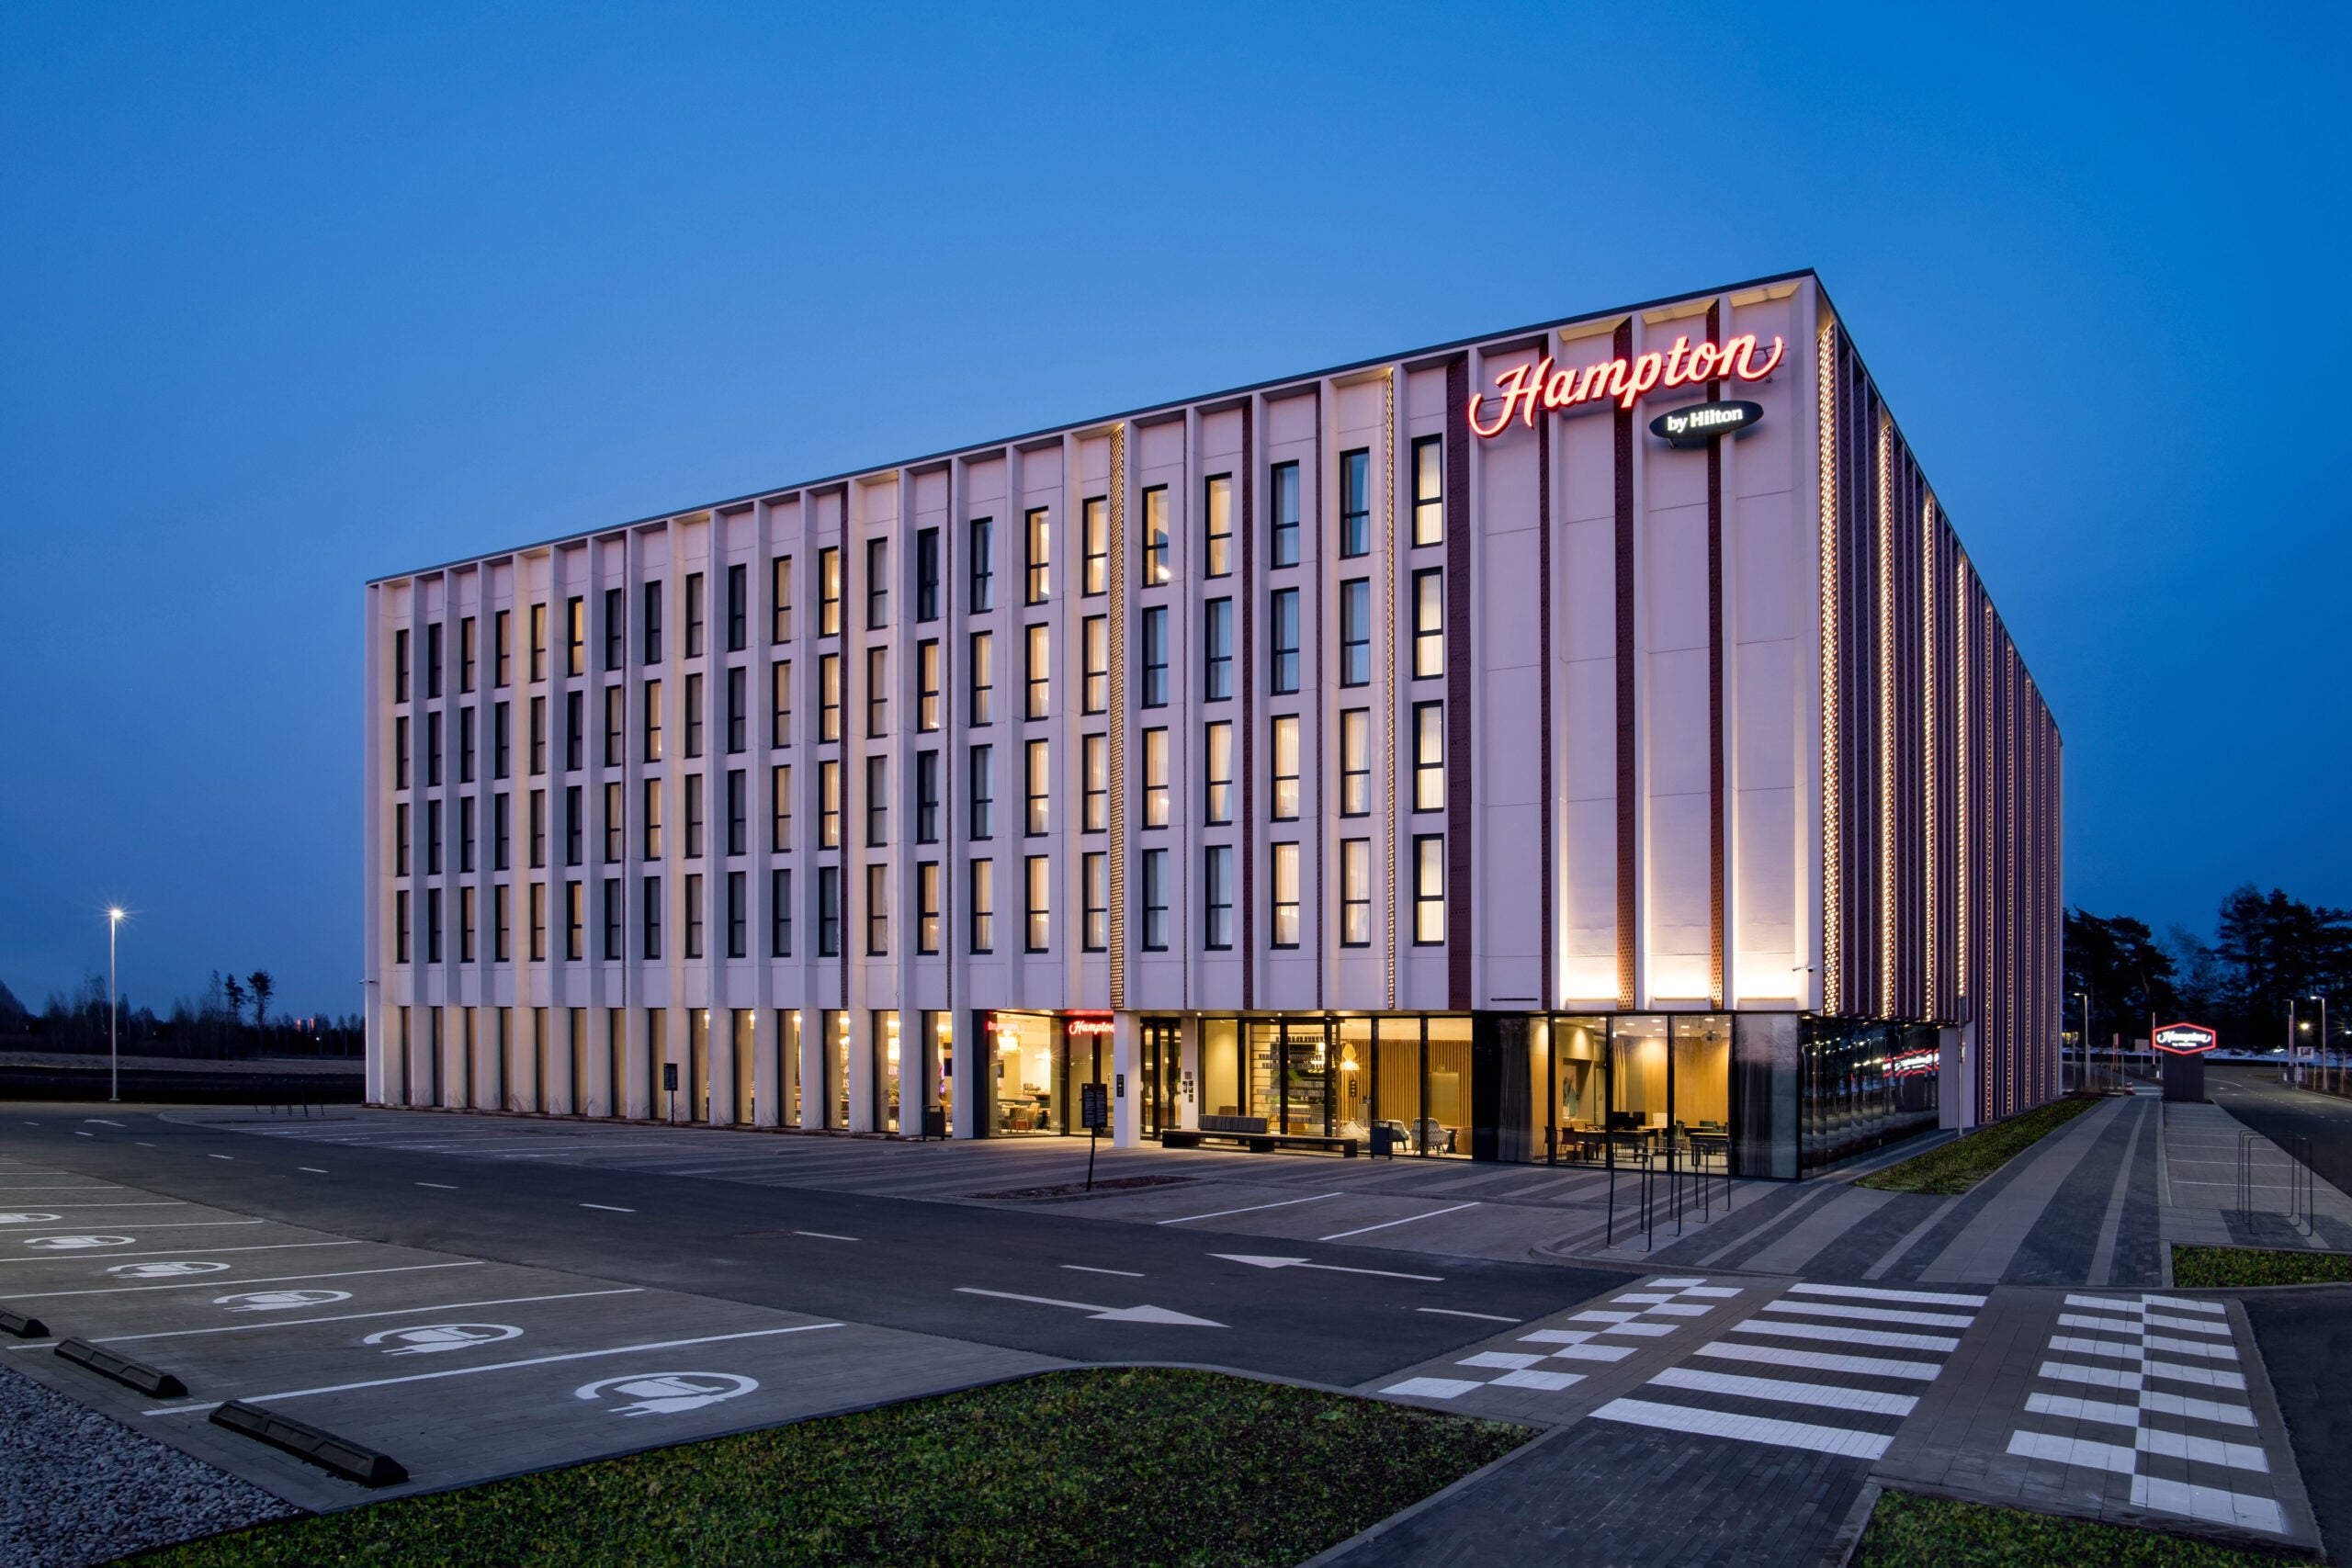 First Hampton by Hilton property opens in Riga, Latvia